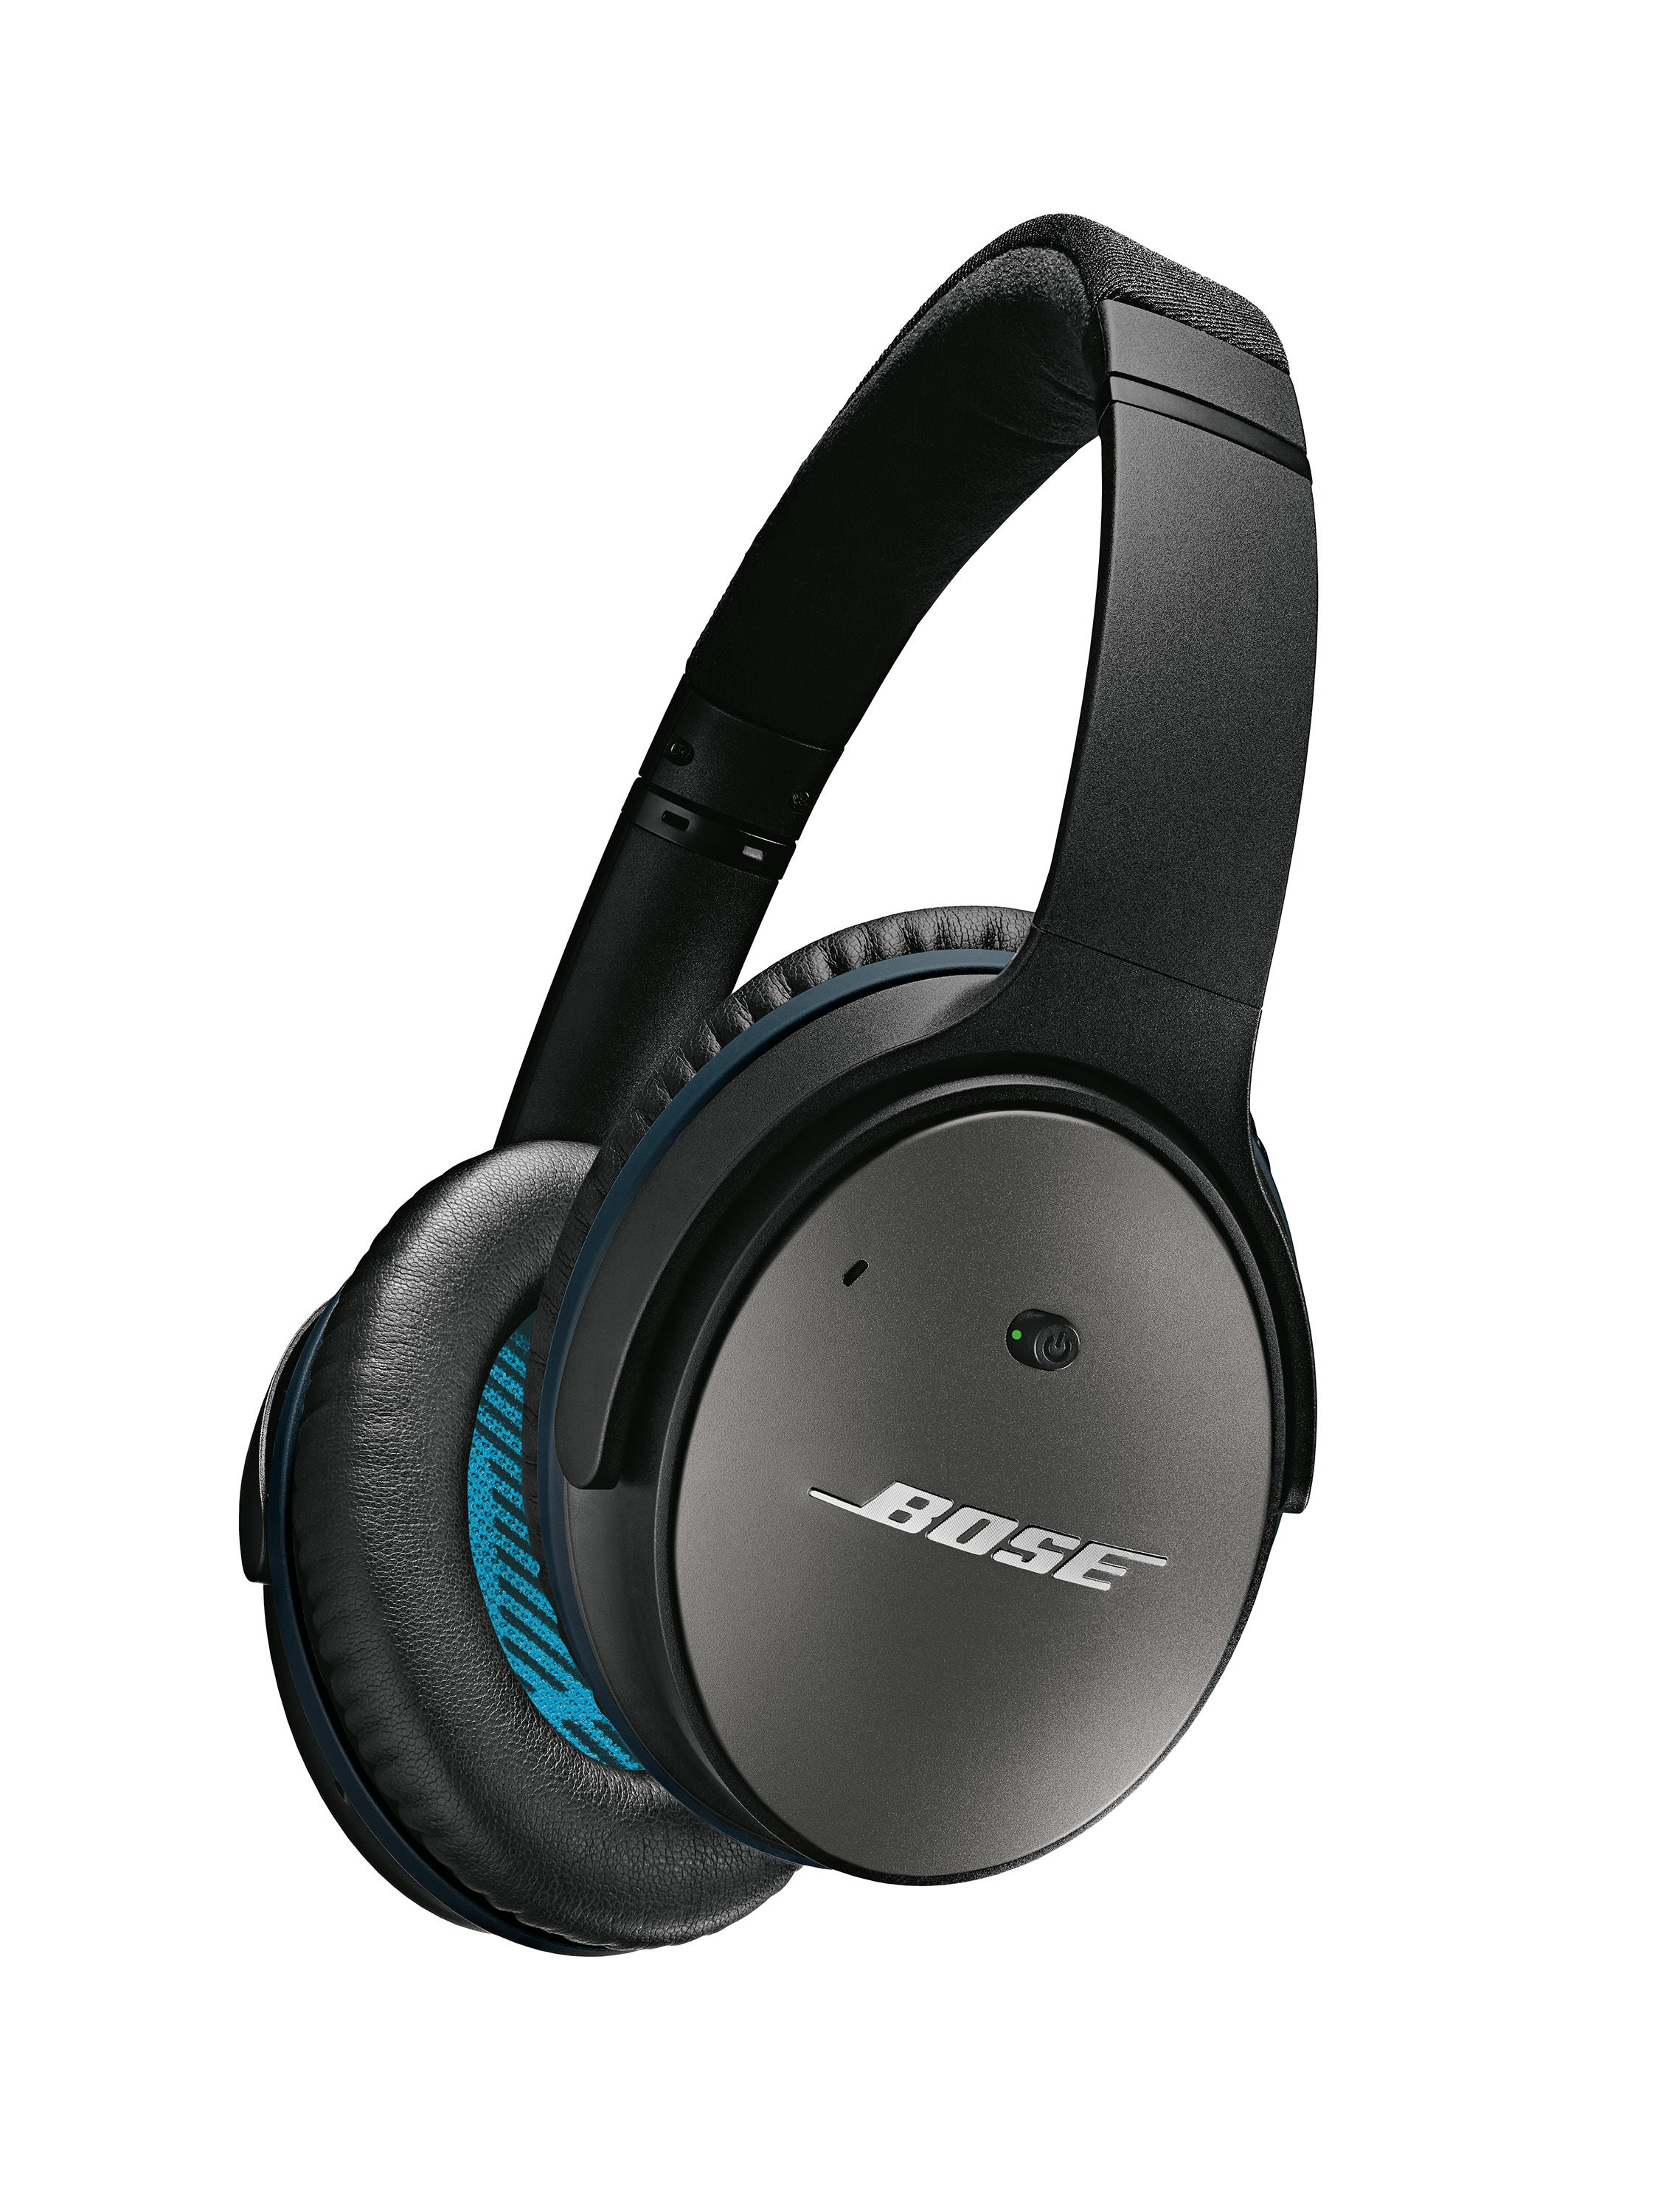 Bose QuietComfort 25 QC25 Acoustic Noise Cancelling Headphones - Refurbished - CentralSound